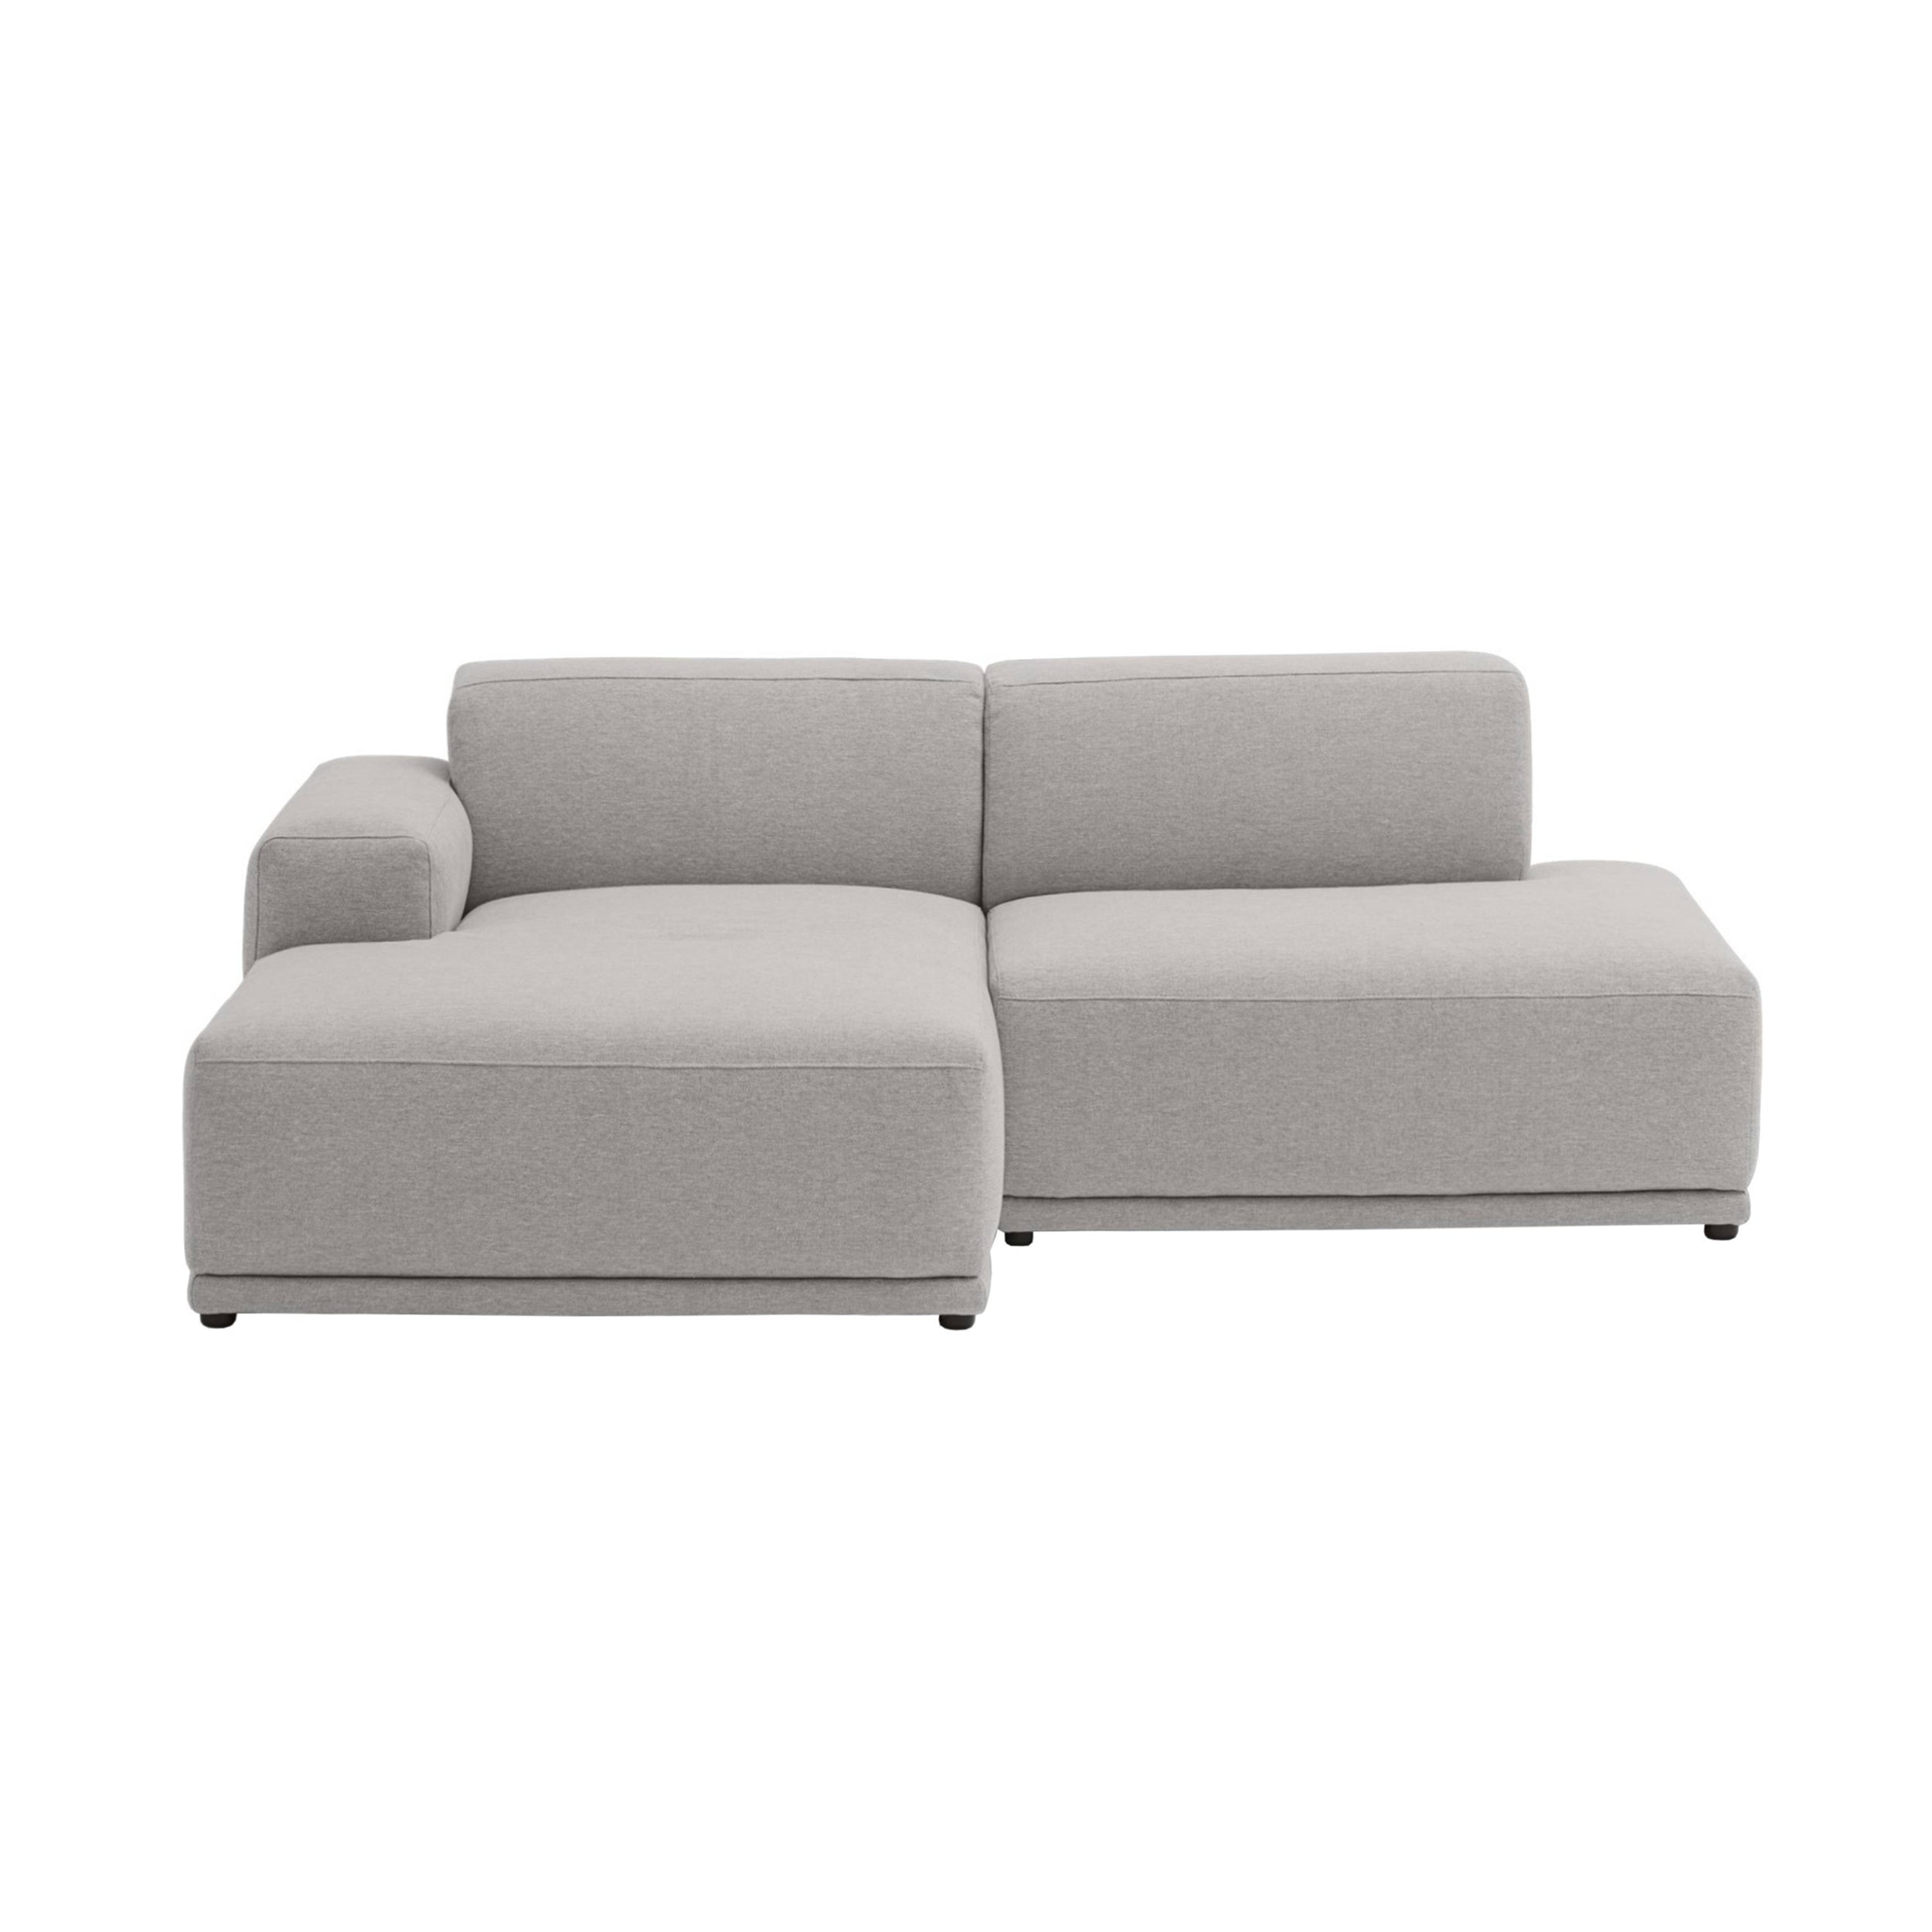 Connect Soft Modular Sofa: 2 Seater + Configuration 3 + Clay 12